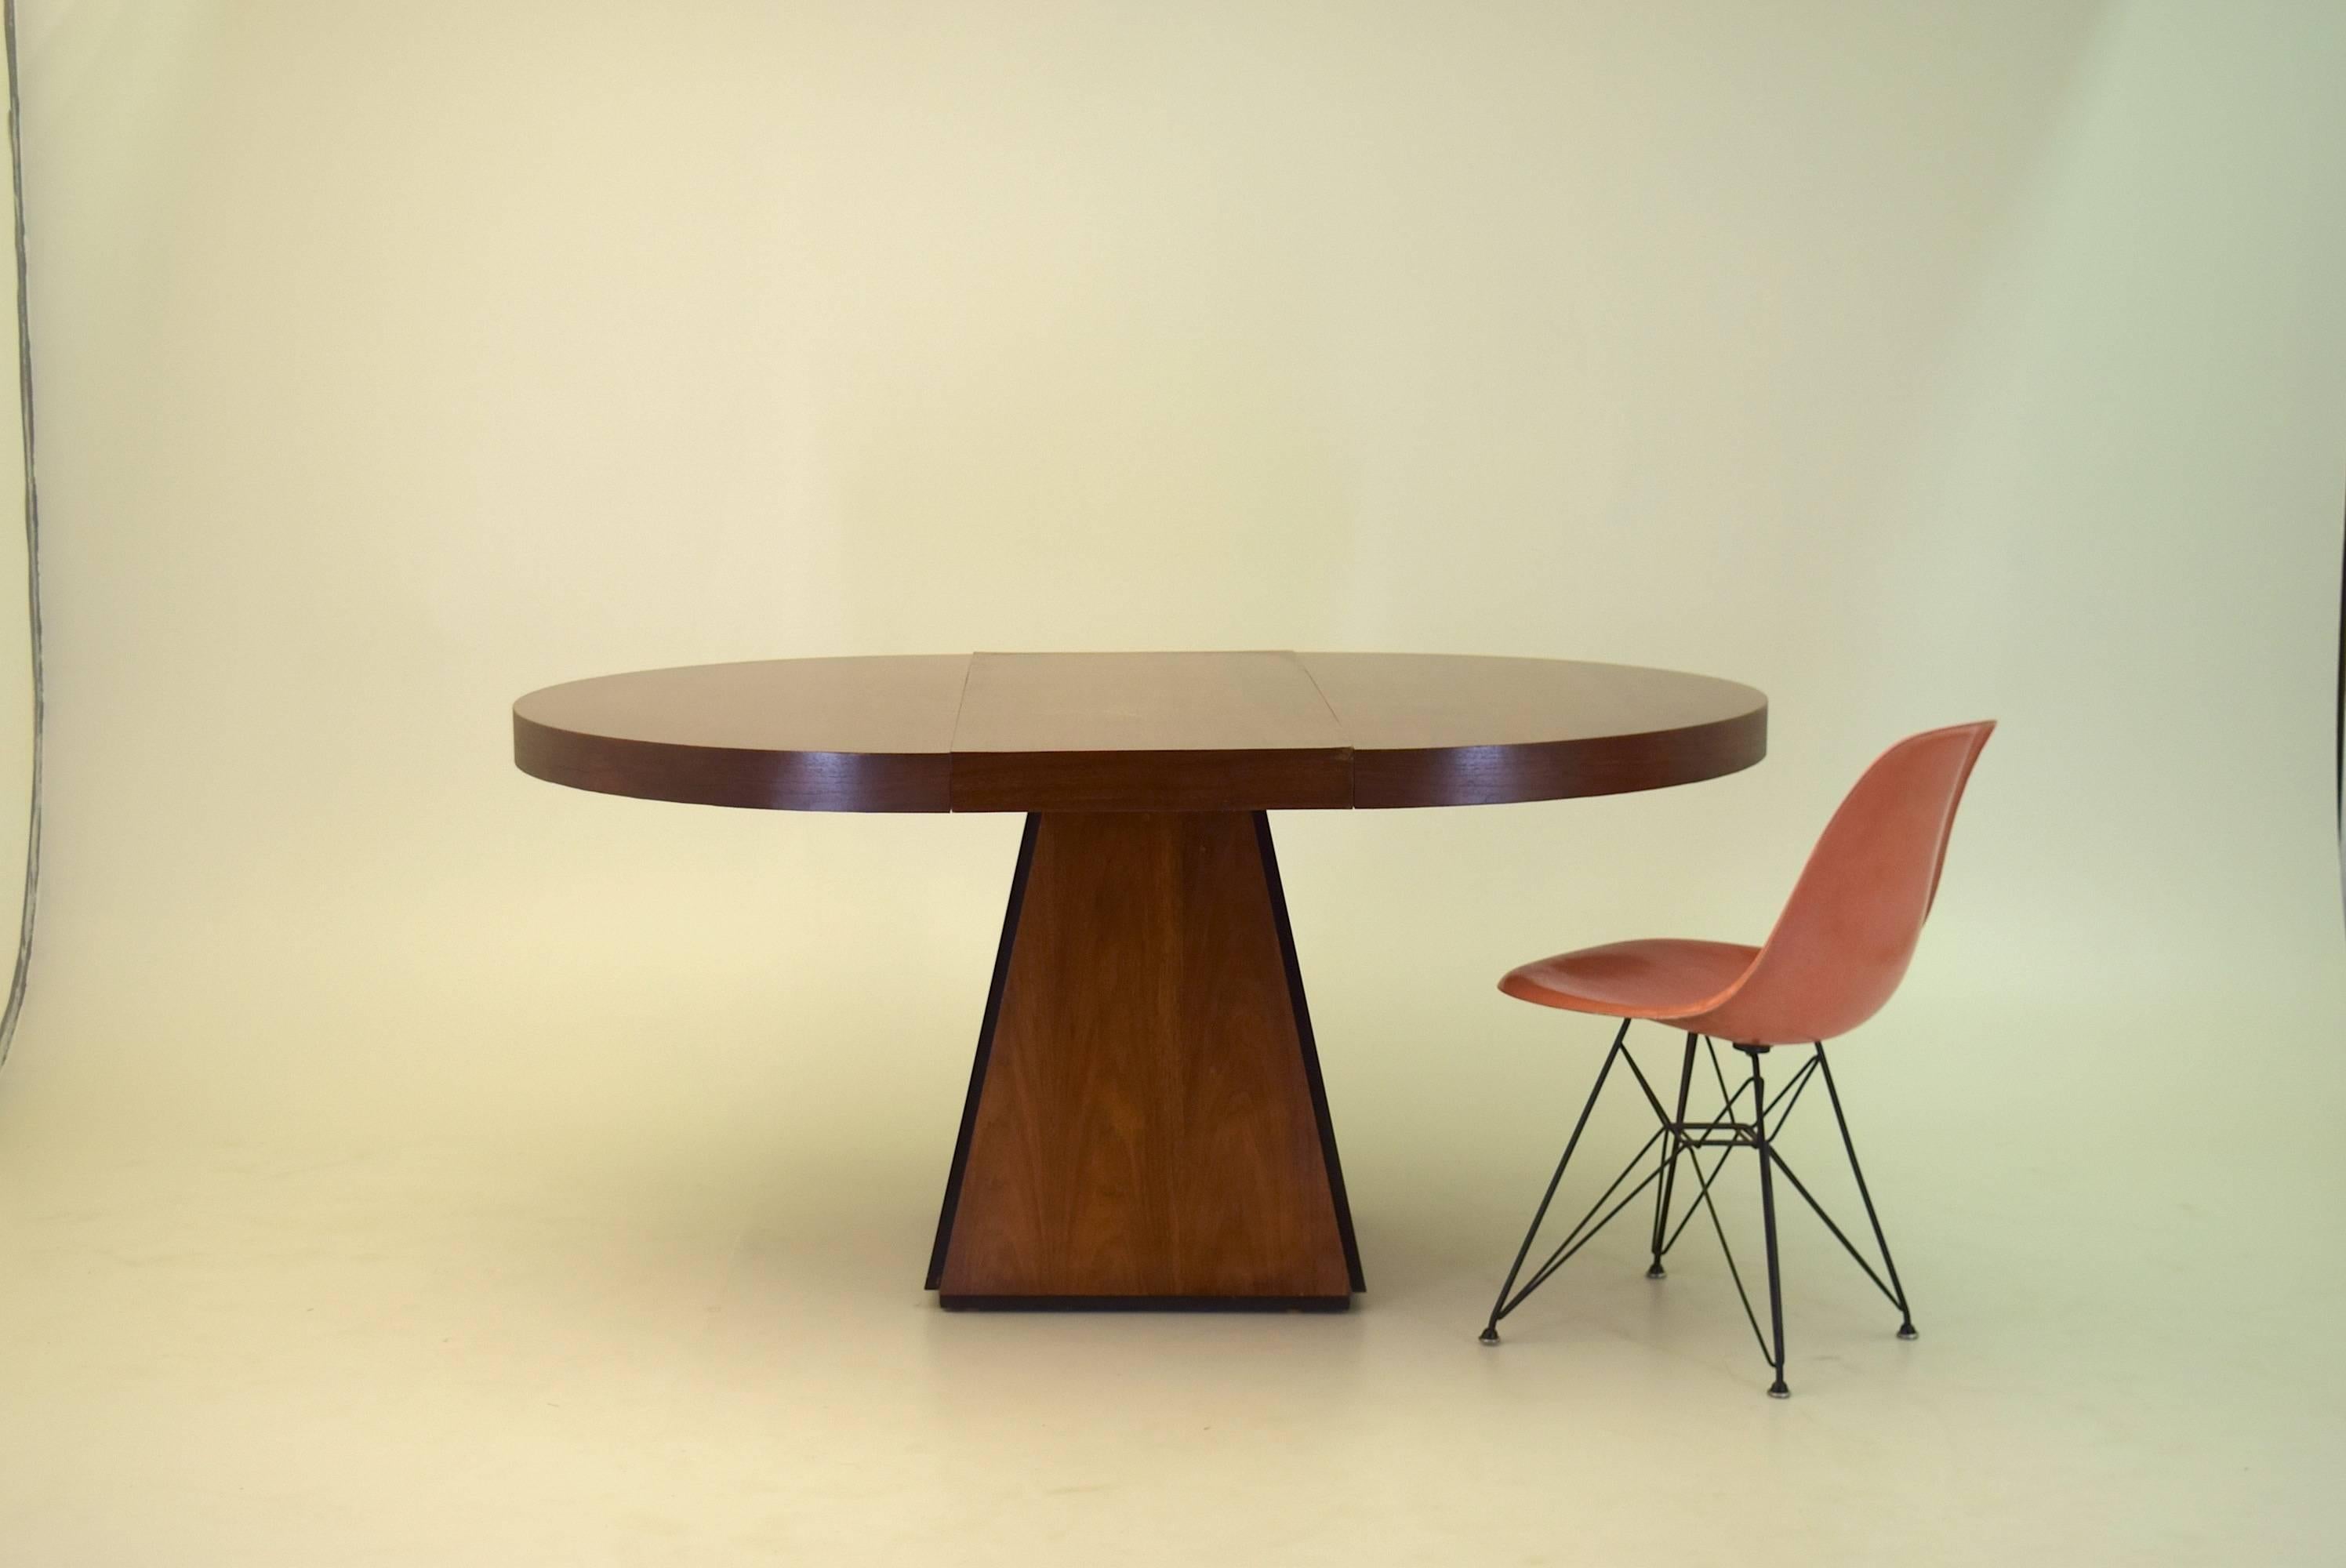 American Pierre Cardin Round Obelisk Dining Table in Walnut with Extension Leaf